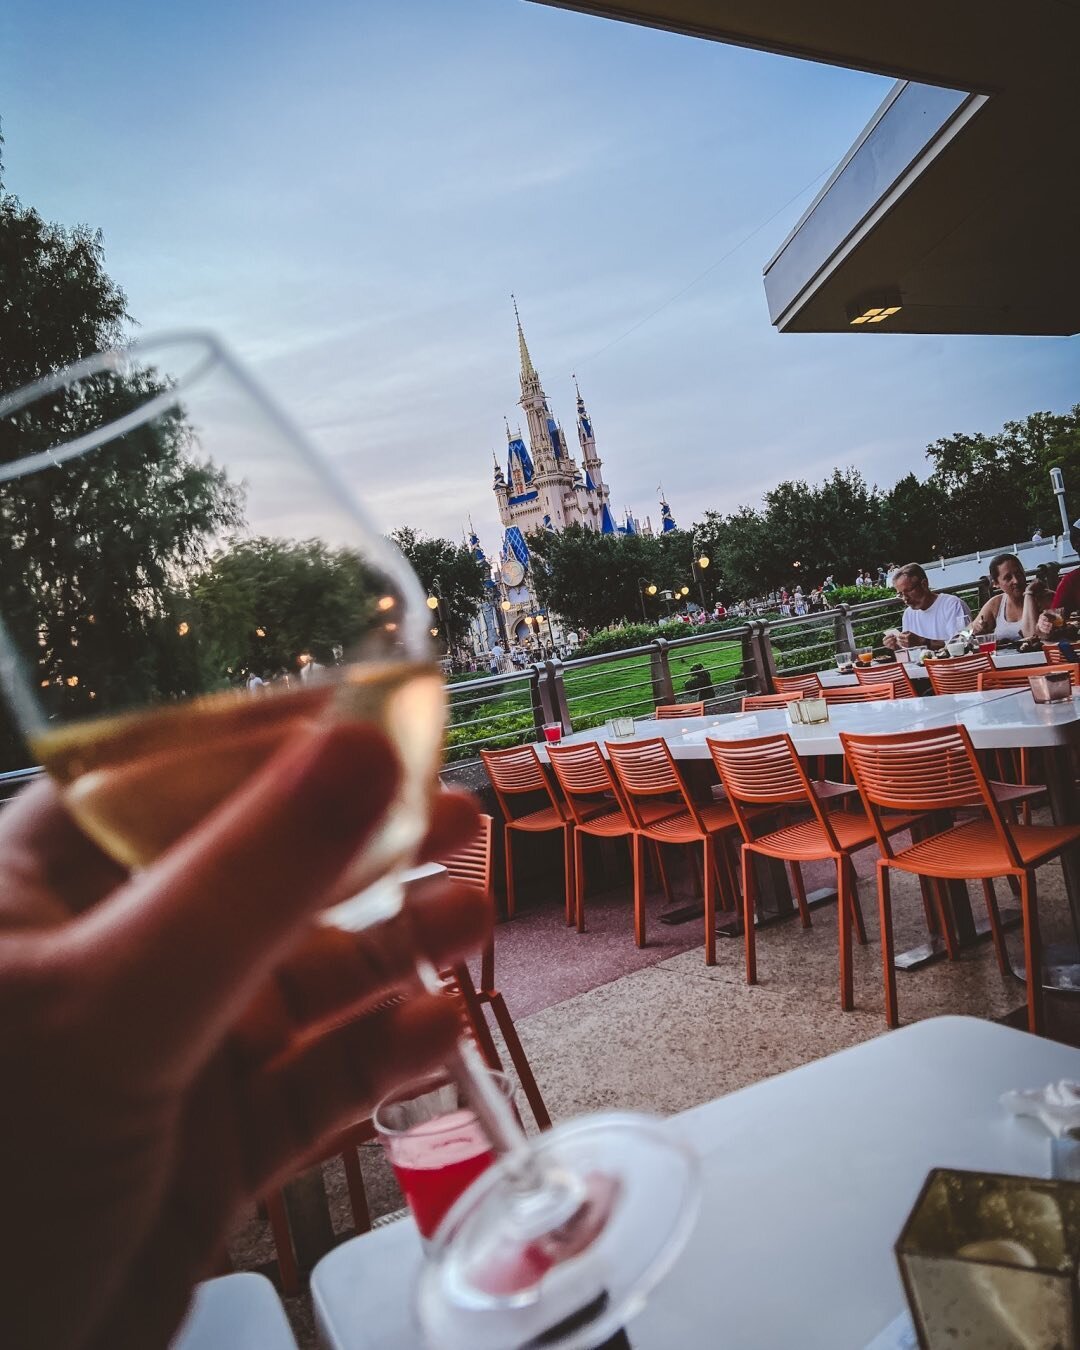 Cheers to this beautiful castle. It&rsquo;s been the best week ever here and we are enjoying fireworks and wine to end our trip. ✌️❤️

#waltdisneyworld50 #disneyparks #magickingdom